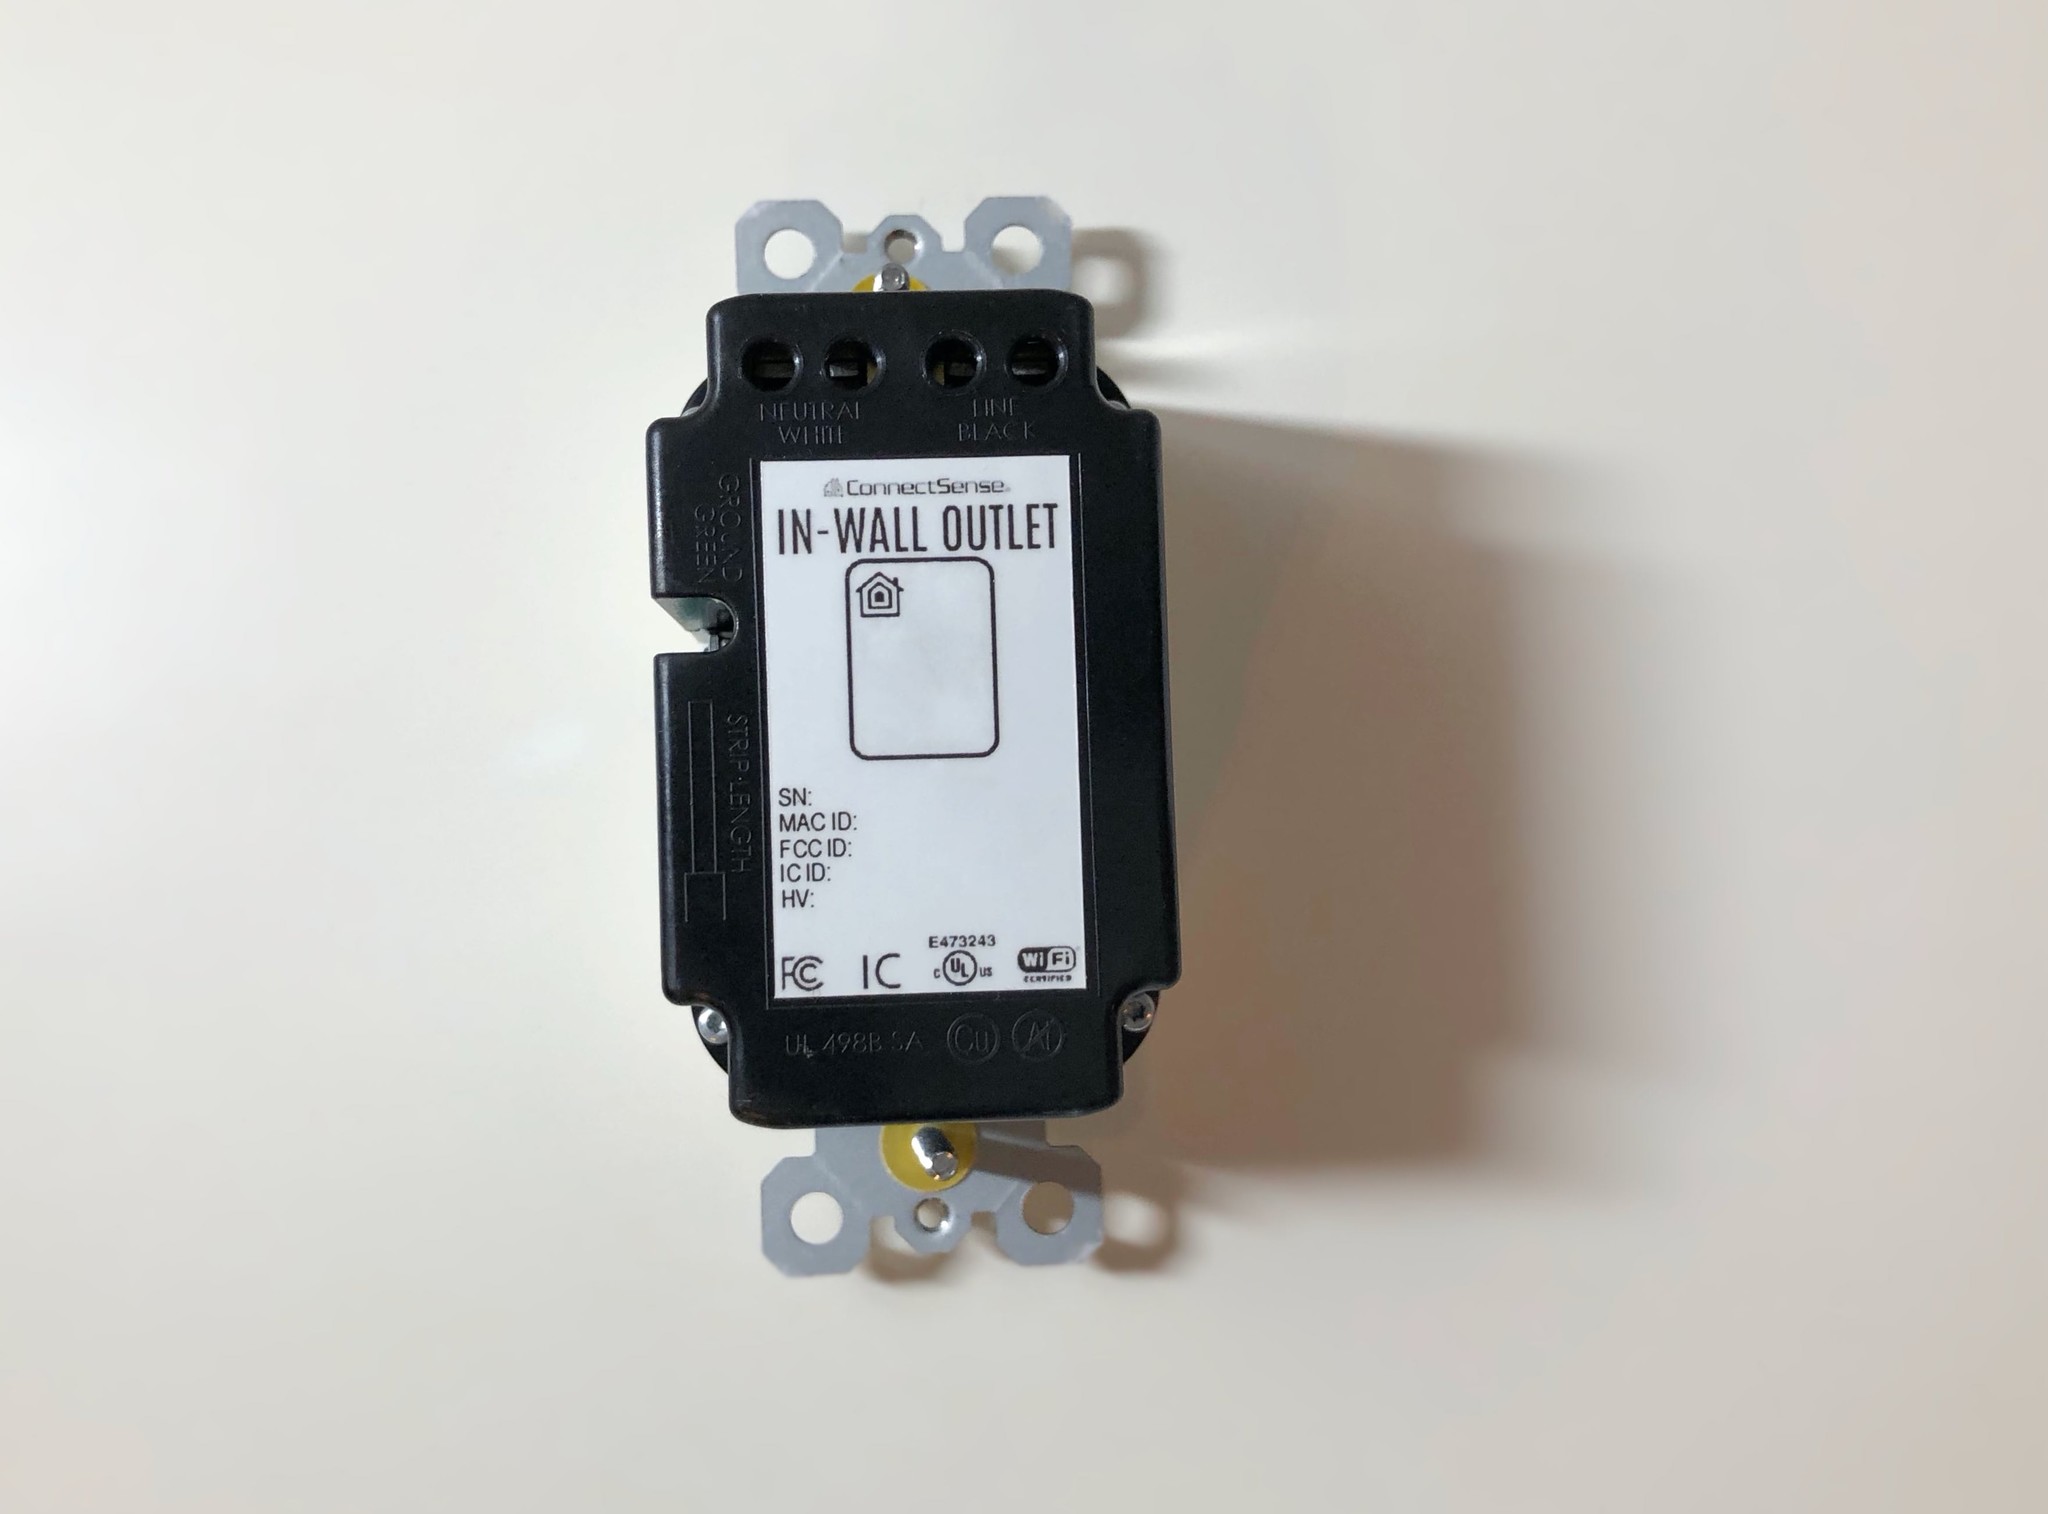 Connectsense Smart Inwall Outlet back